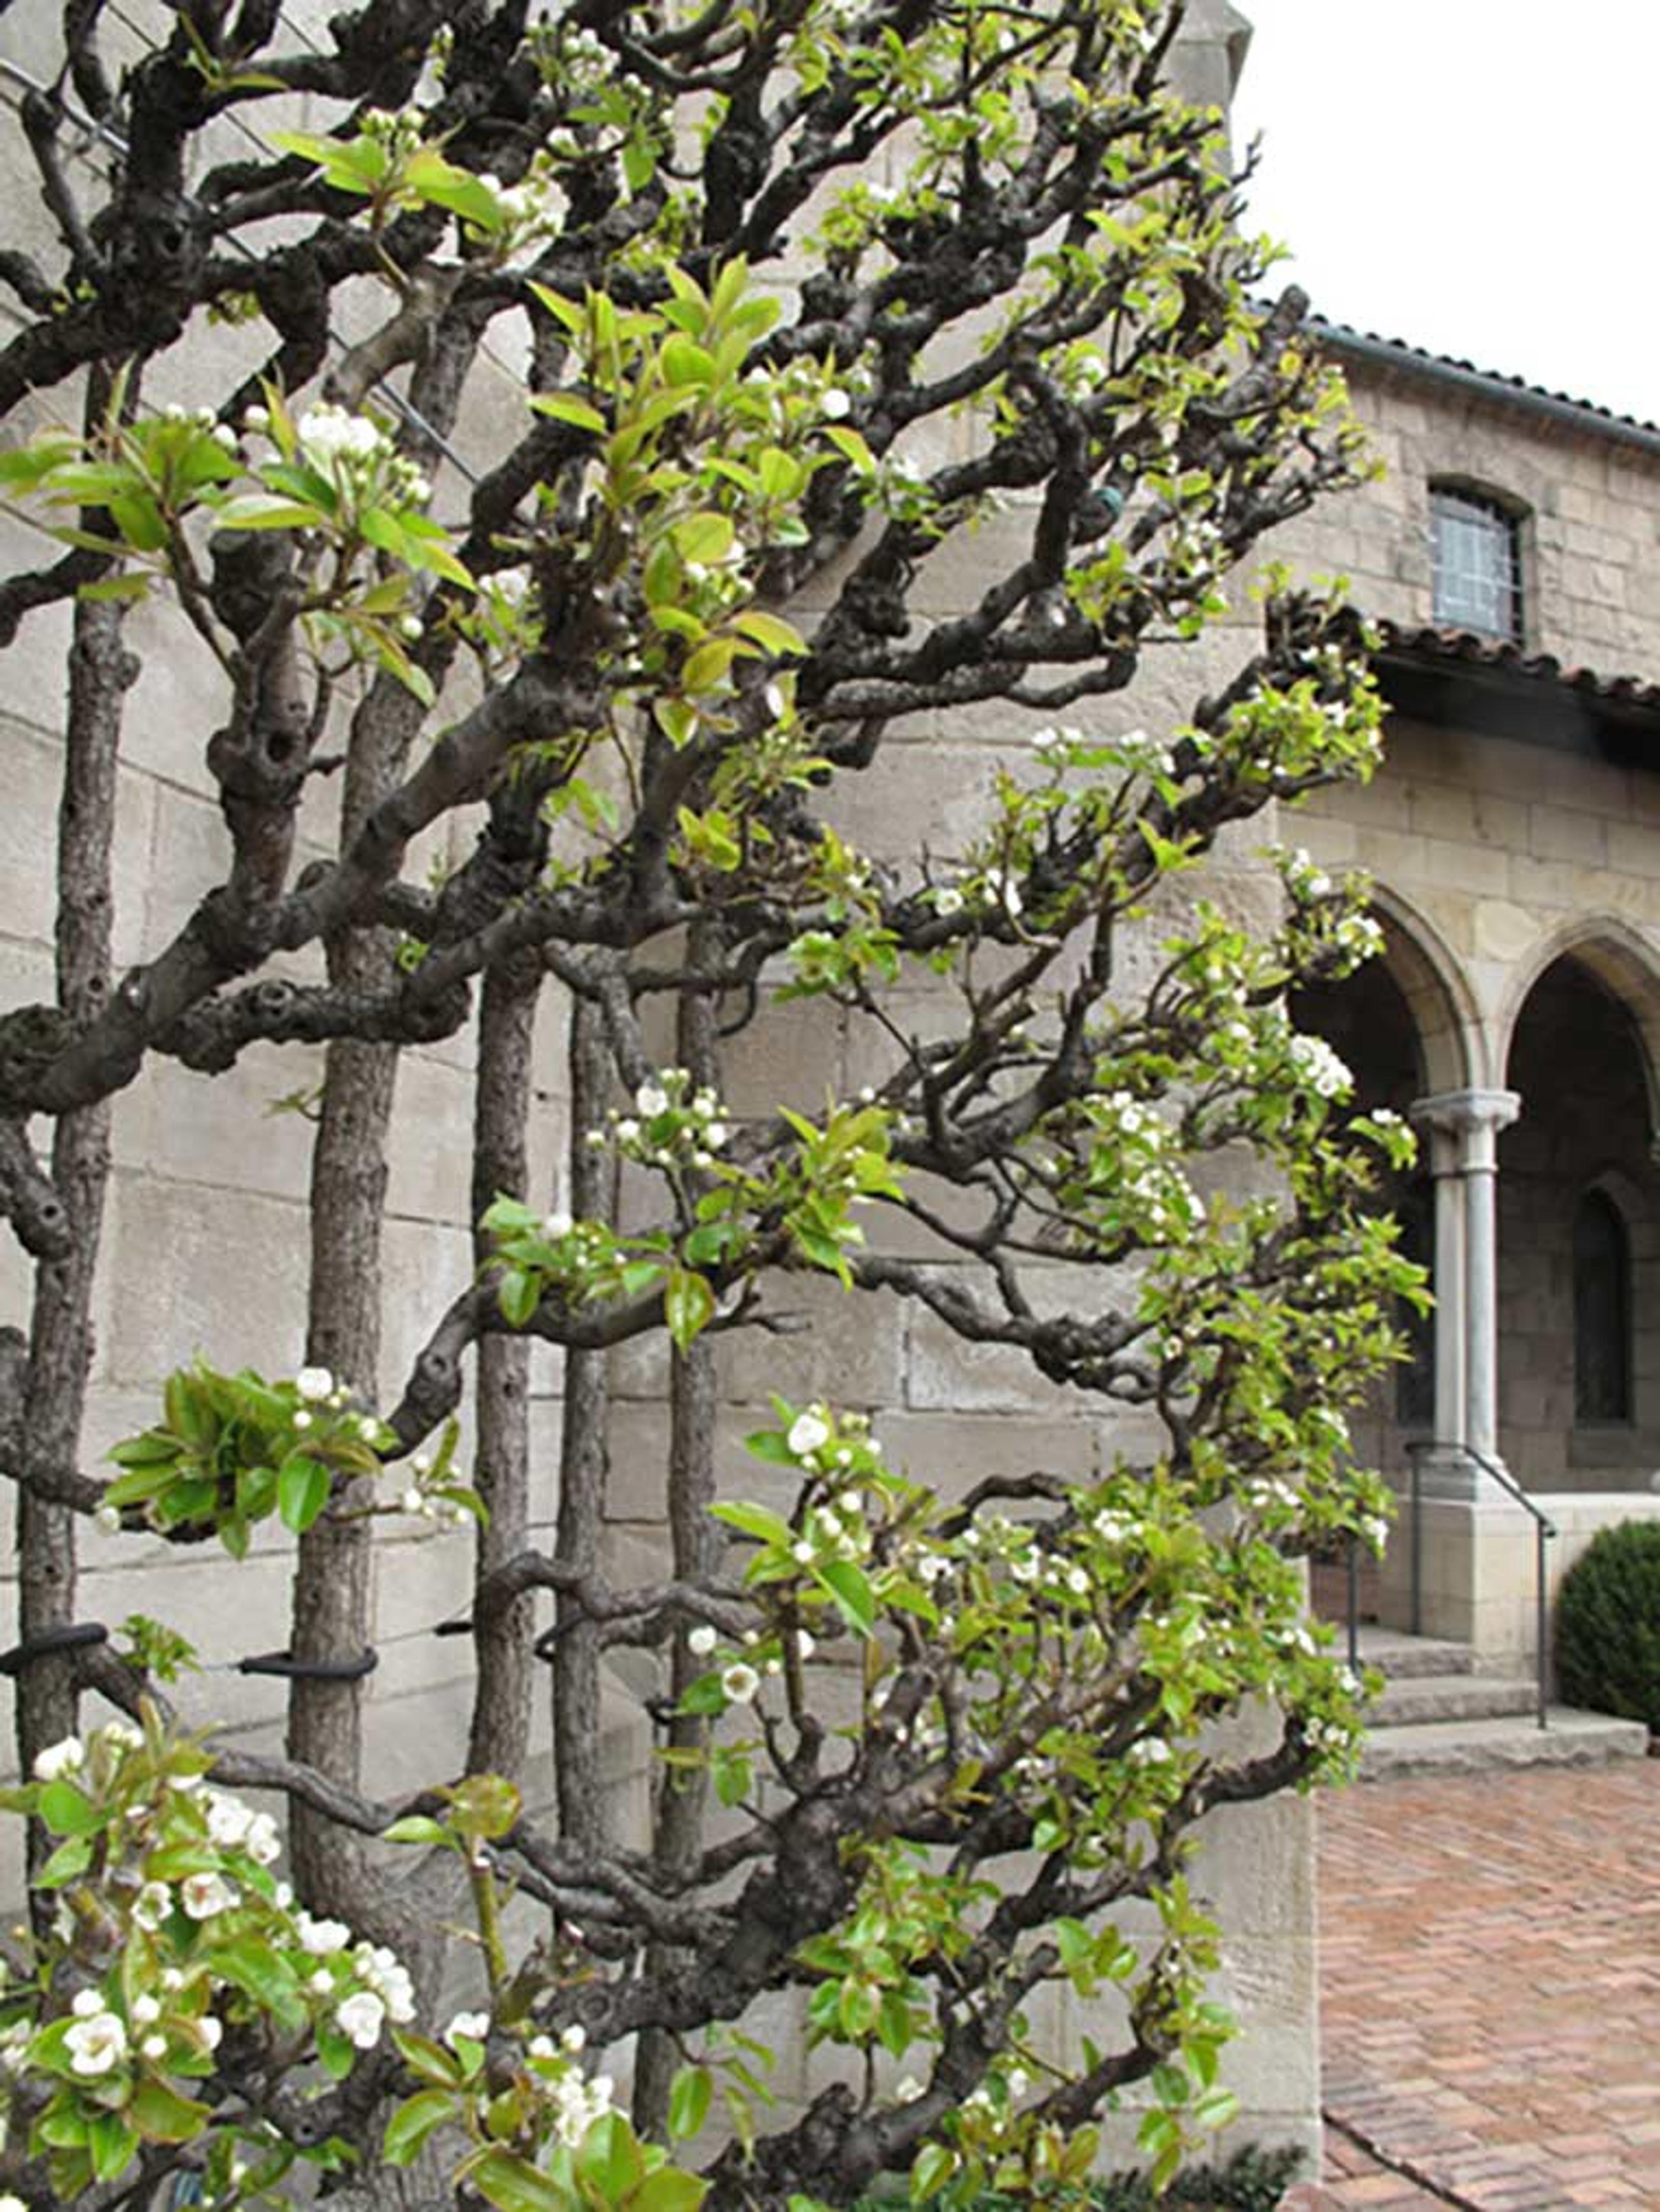 Pear tree at The Met Cloisters garden